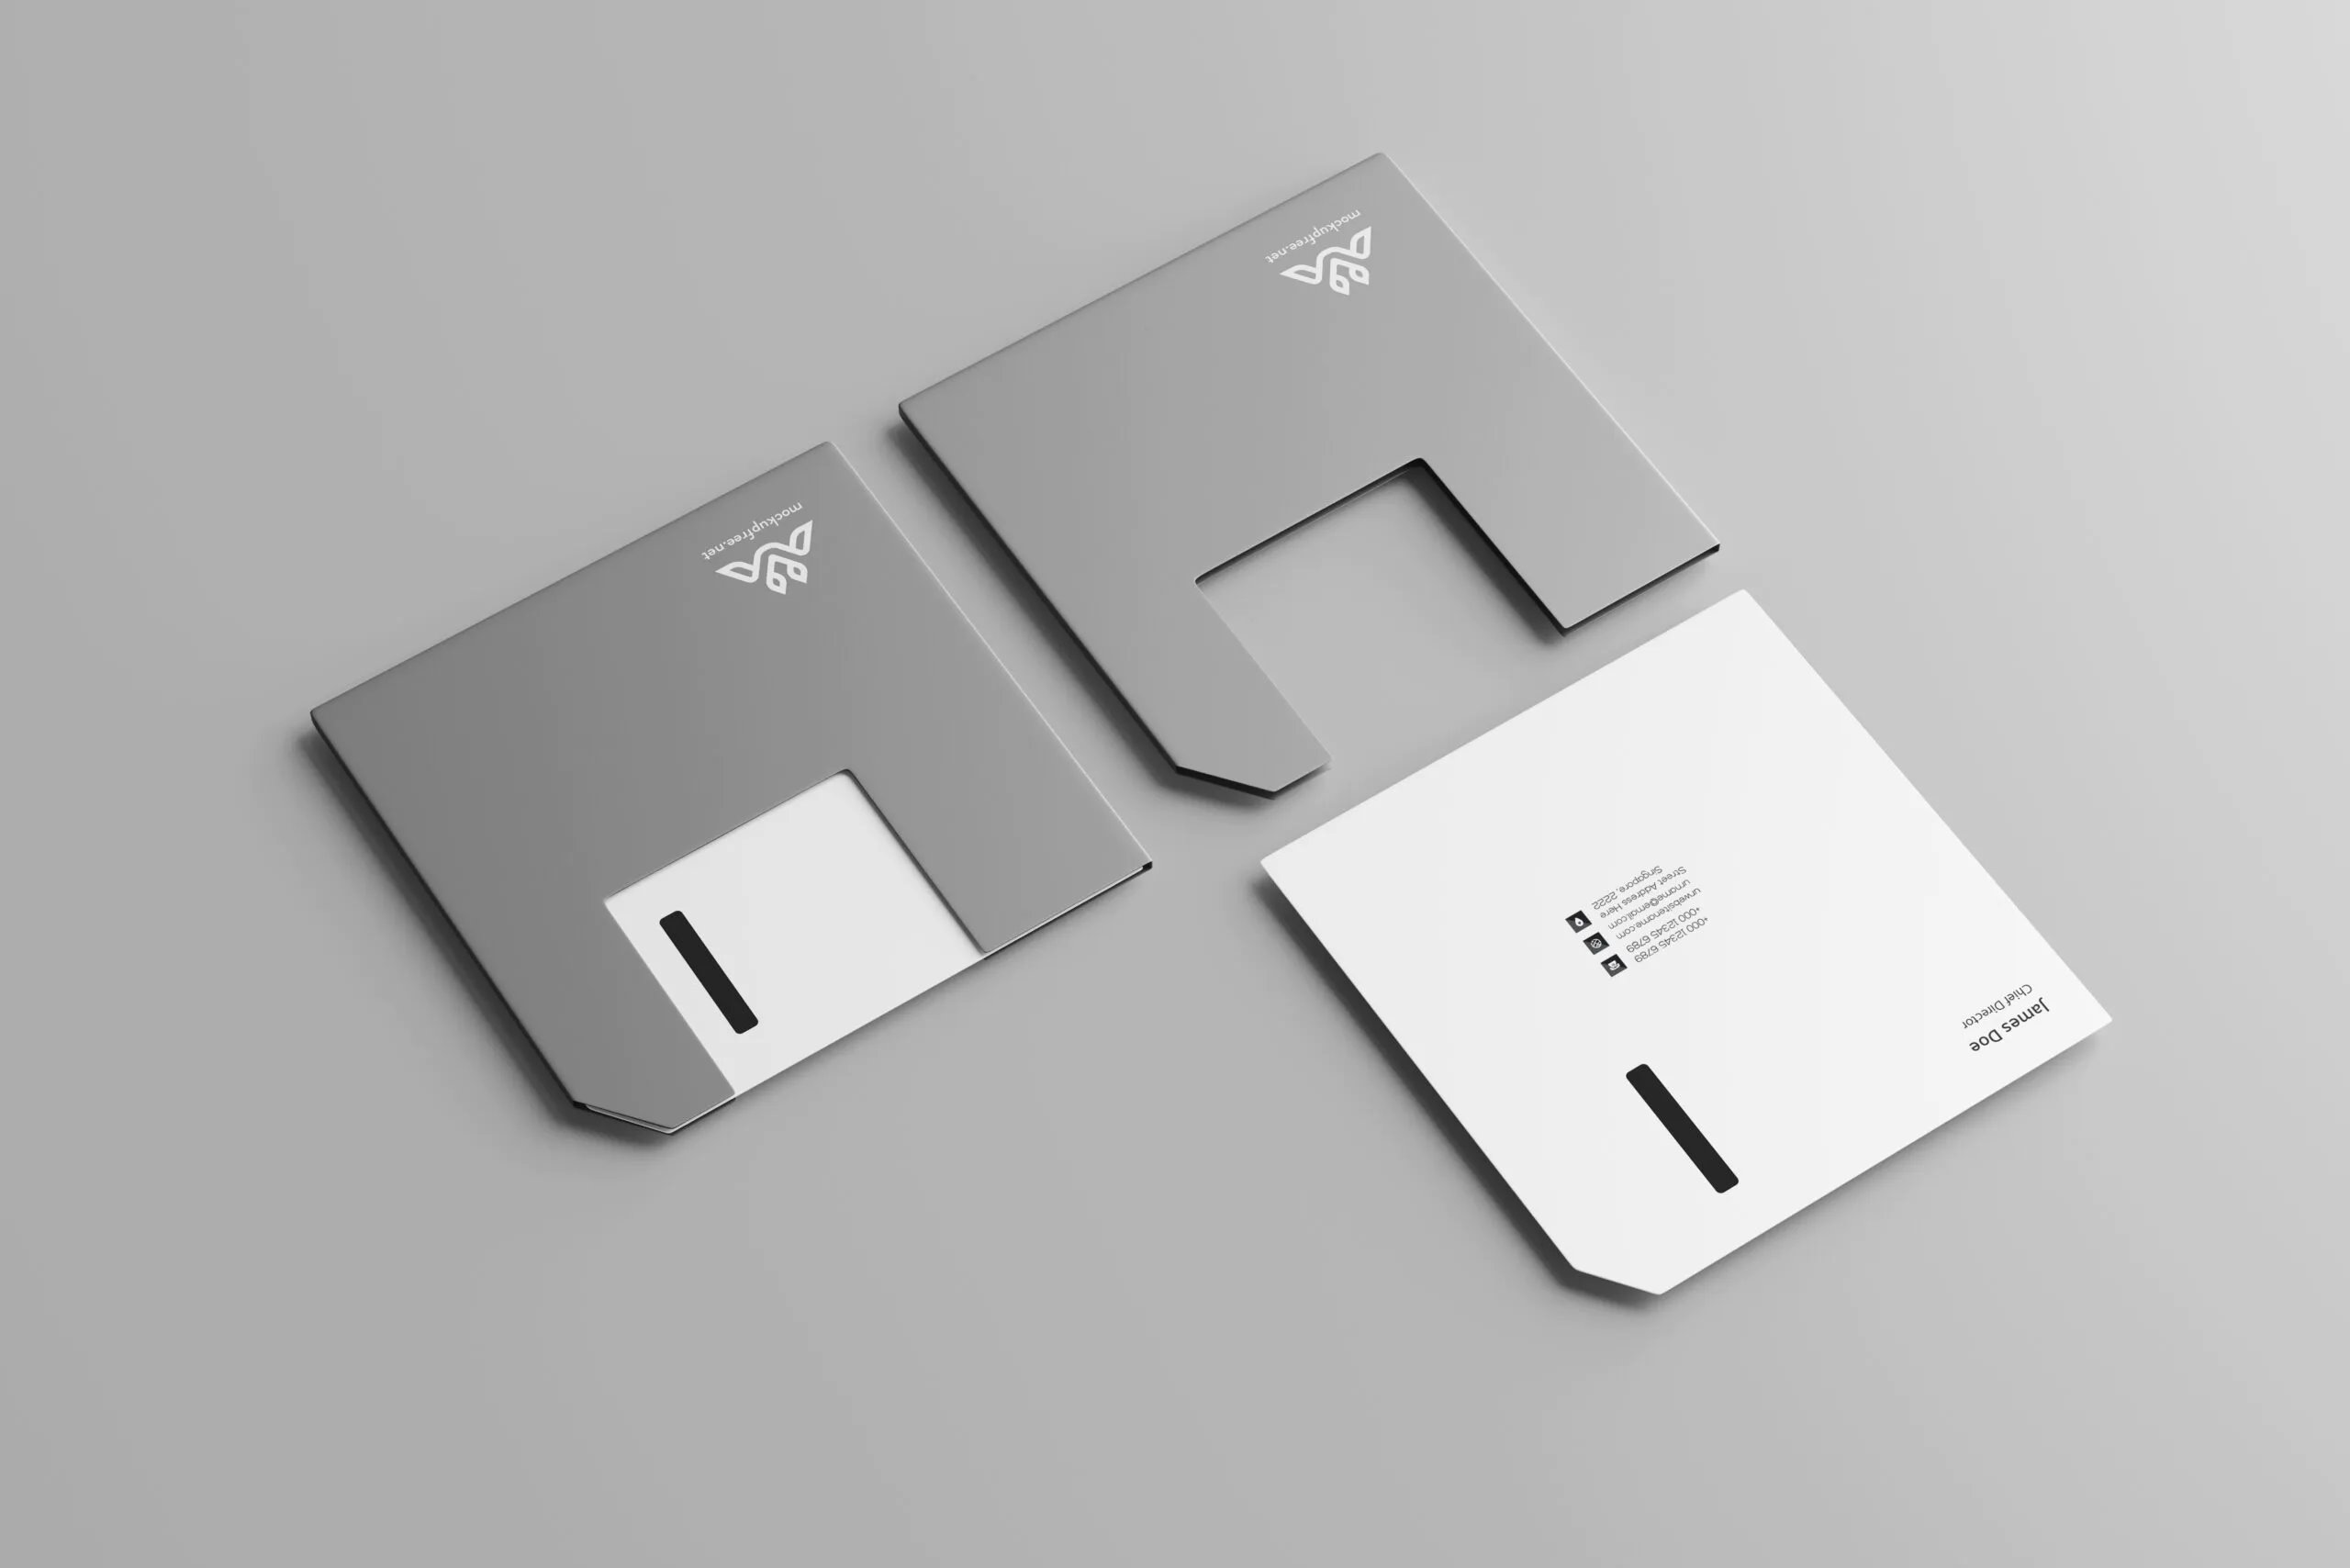 5 Mockups of Floppy Disk Shaped Business Cards in Various Views FREE PSD